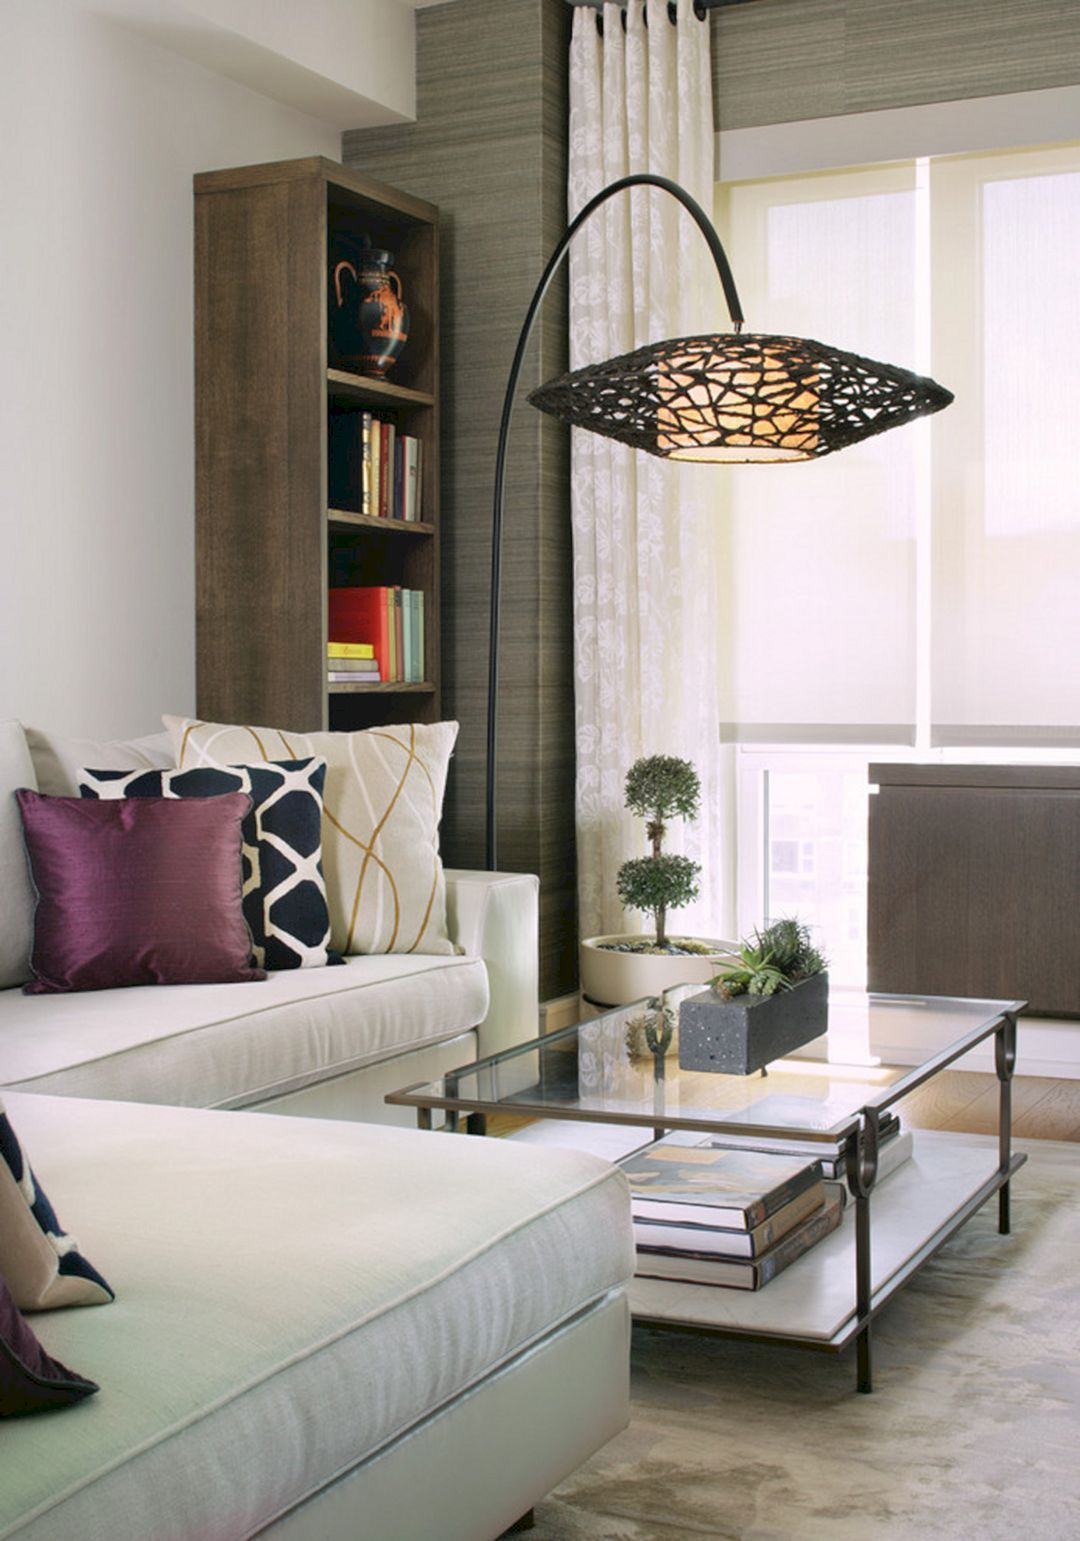 25 Awesome Living Room Lamp Ideas That Will Make You Comfort pertaining to sizing 1080 X 1541